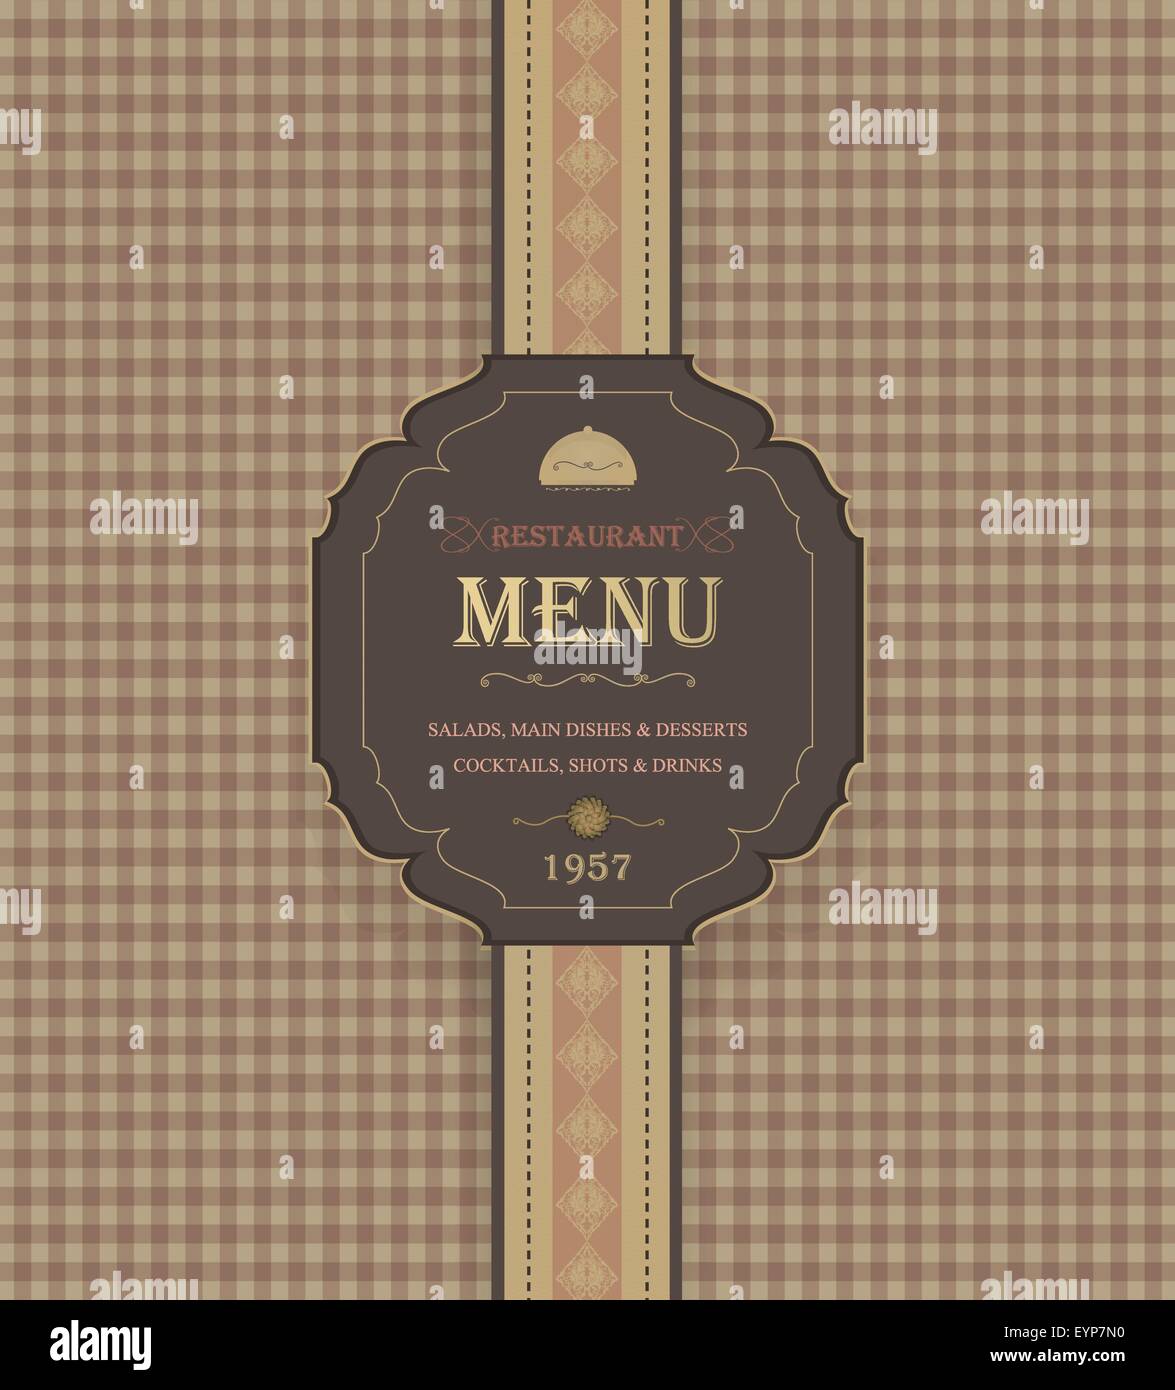 Vintage Restaurant Menu With Checkered Background And Title Inscription Stock Vector